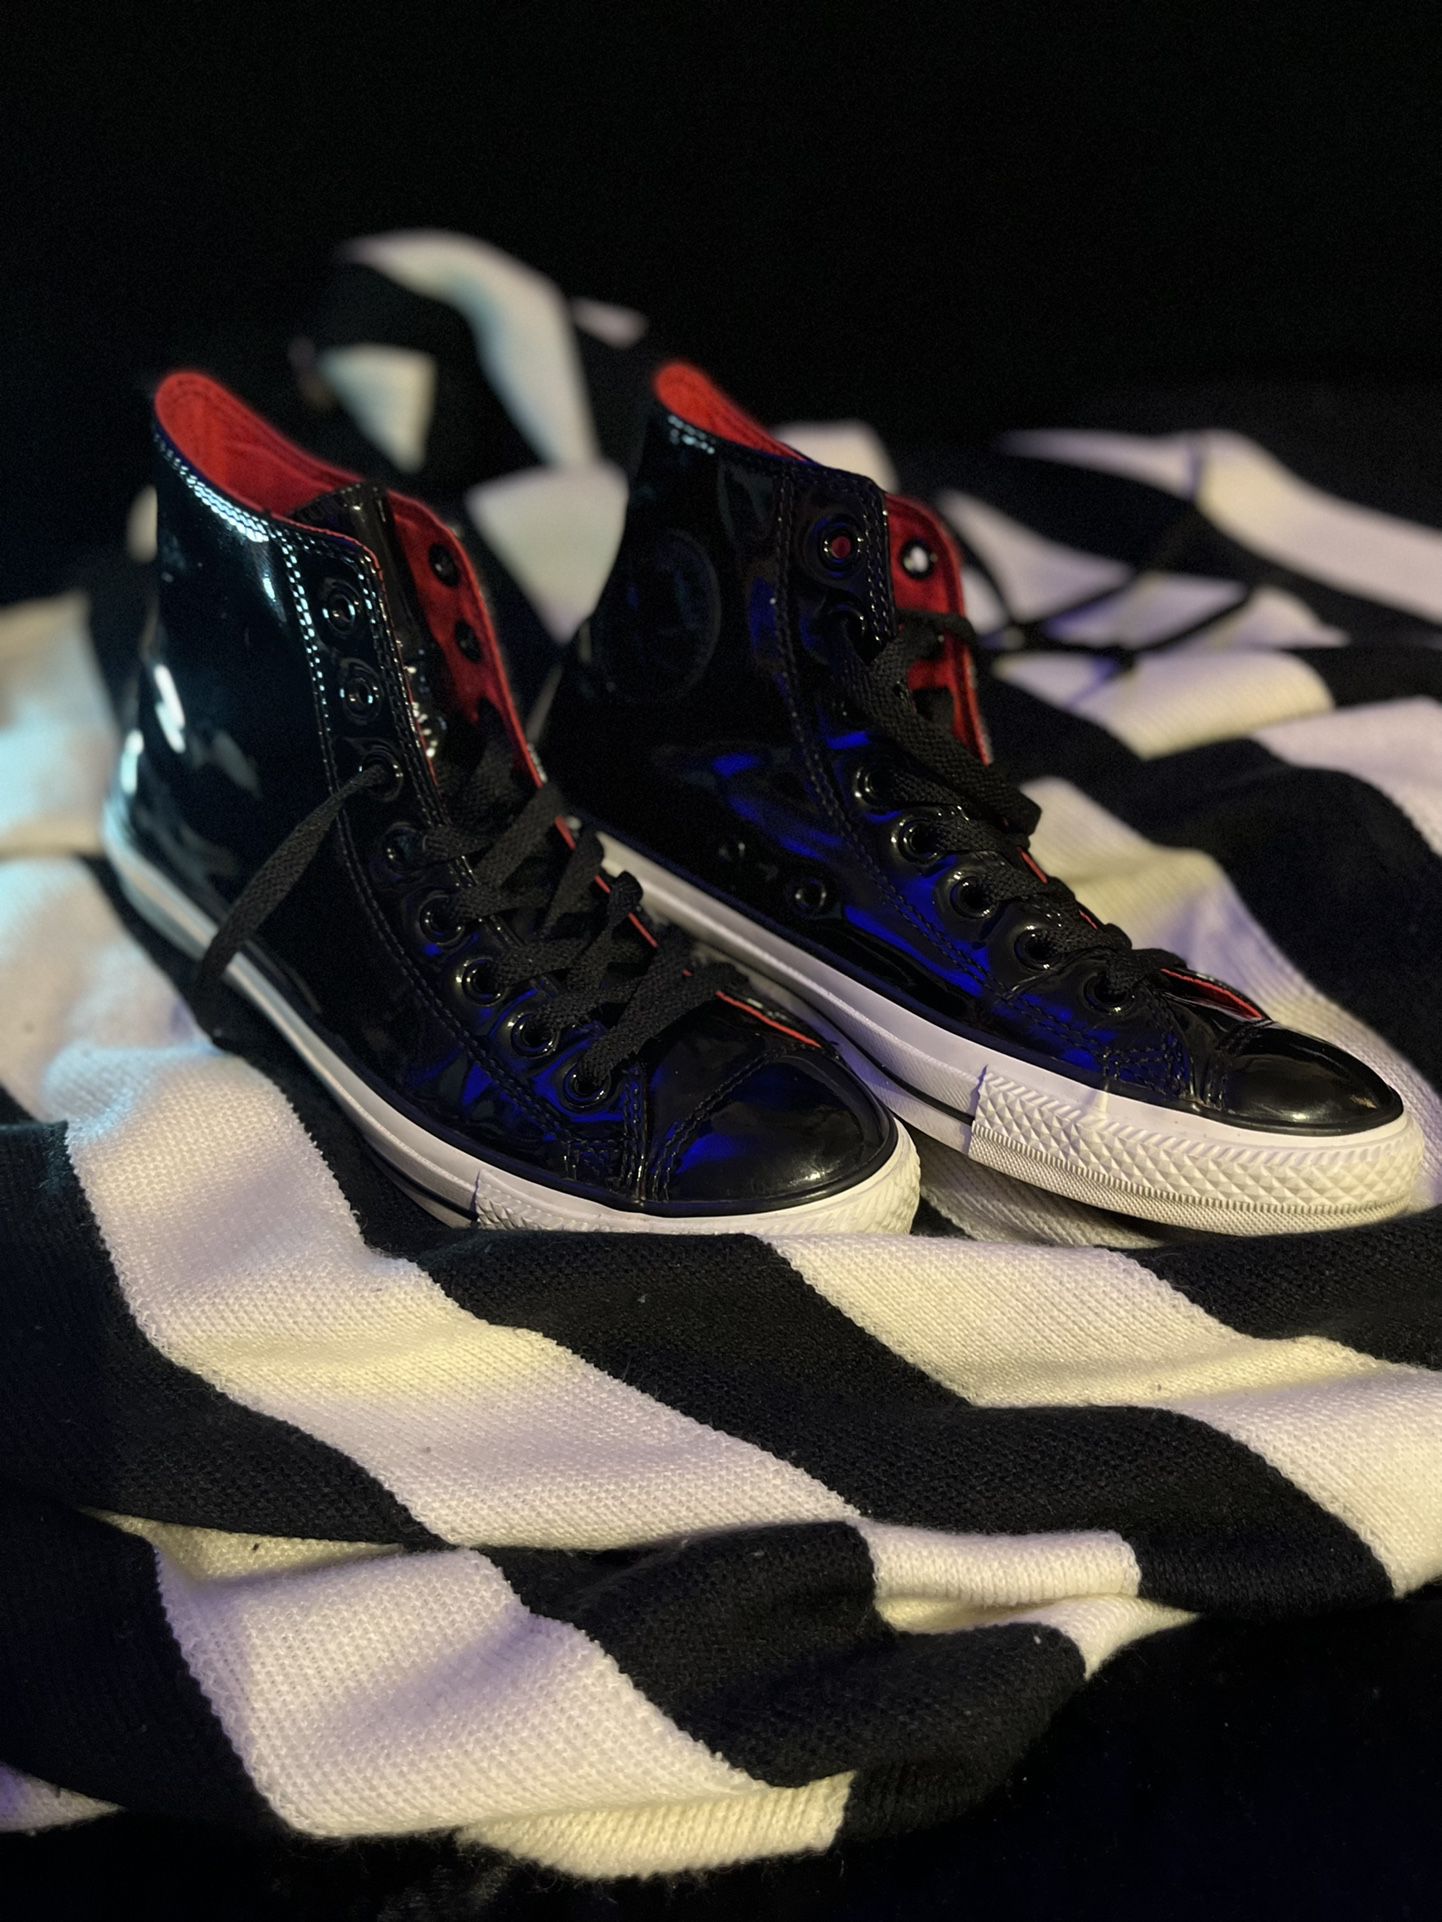 Black Patent Leather Converse All Star High Tops  for Sale in Phoenix,  AZ - OfferUp